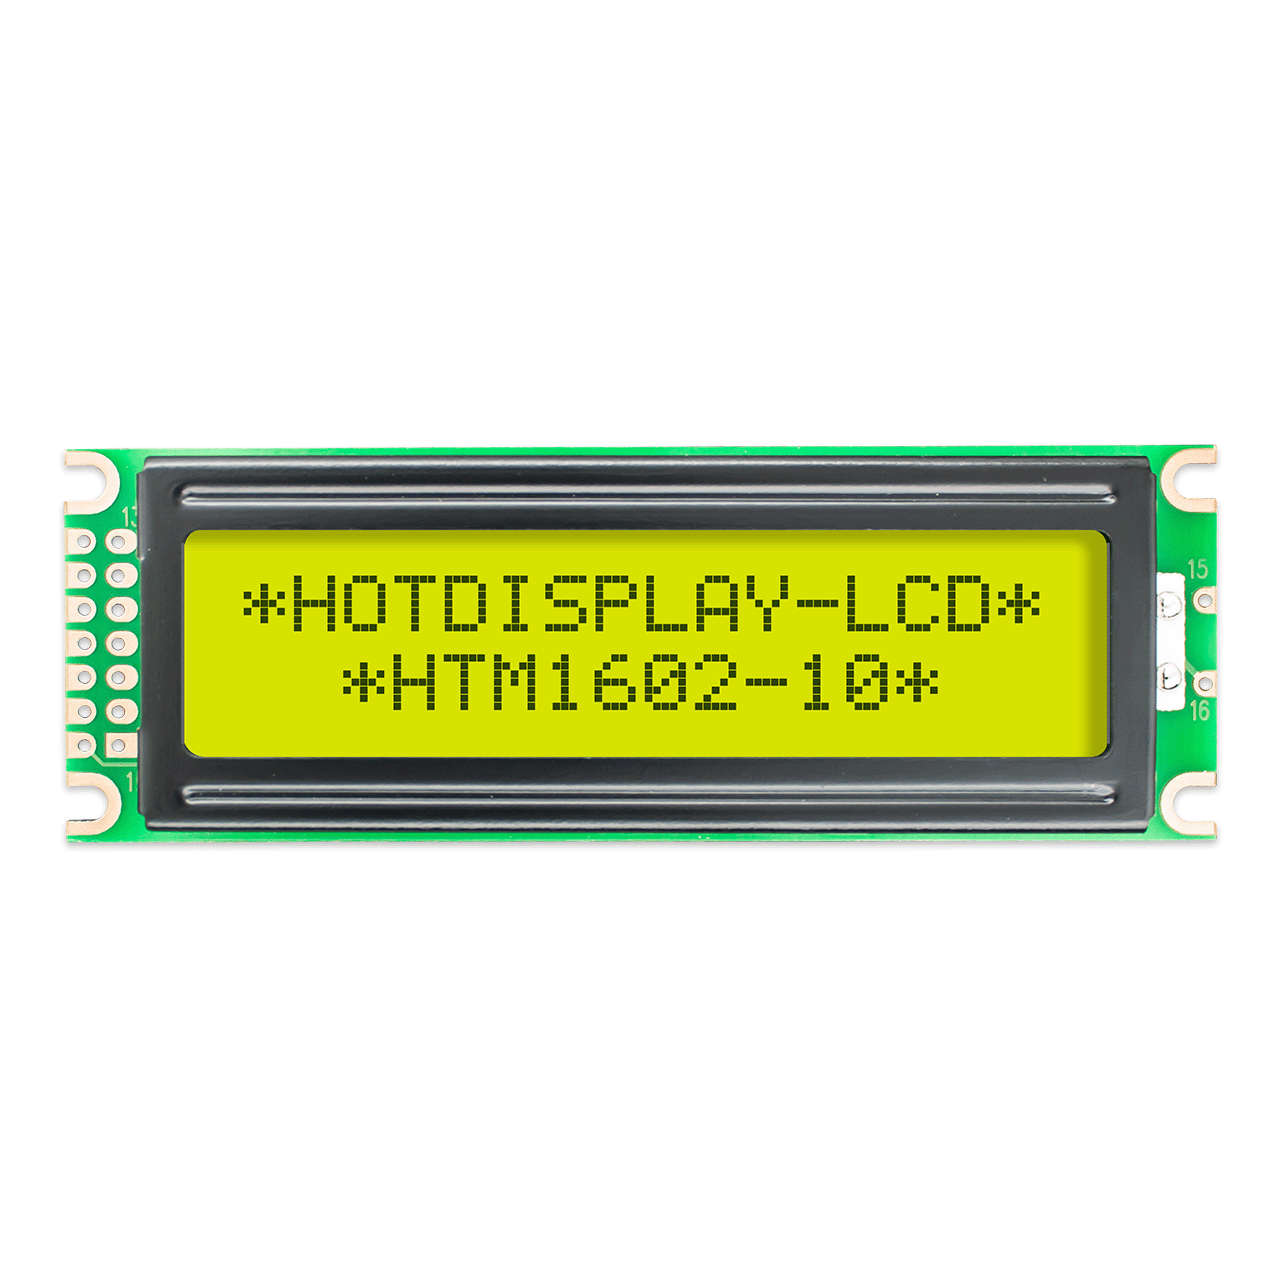 2X16 Character LCD STN+ Gray Display with Yellow/Green Backlight Arduino display